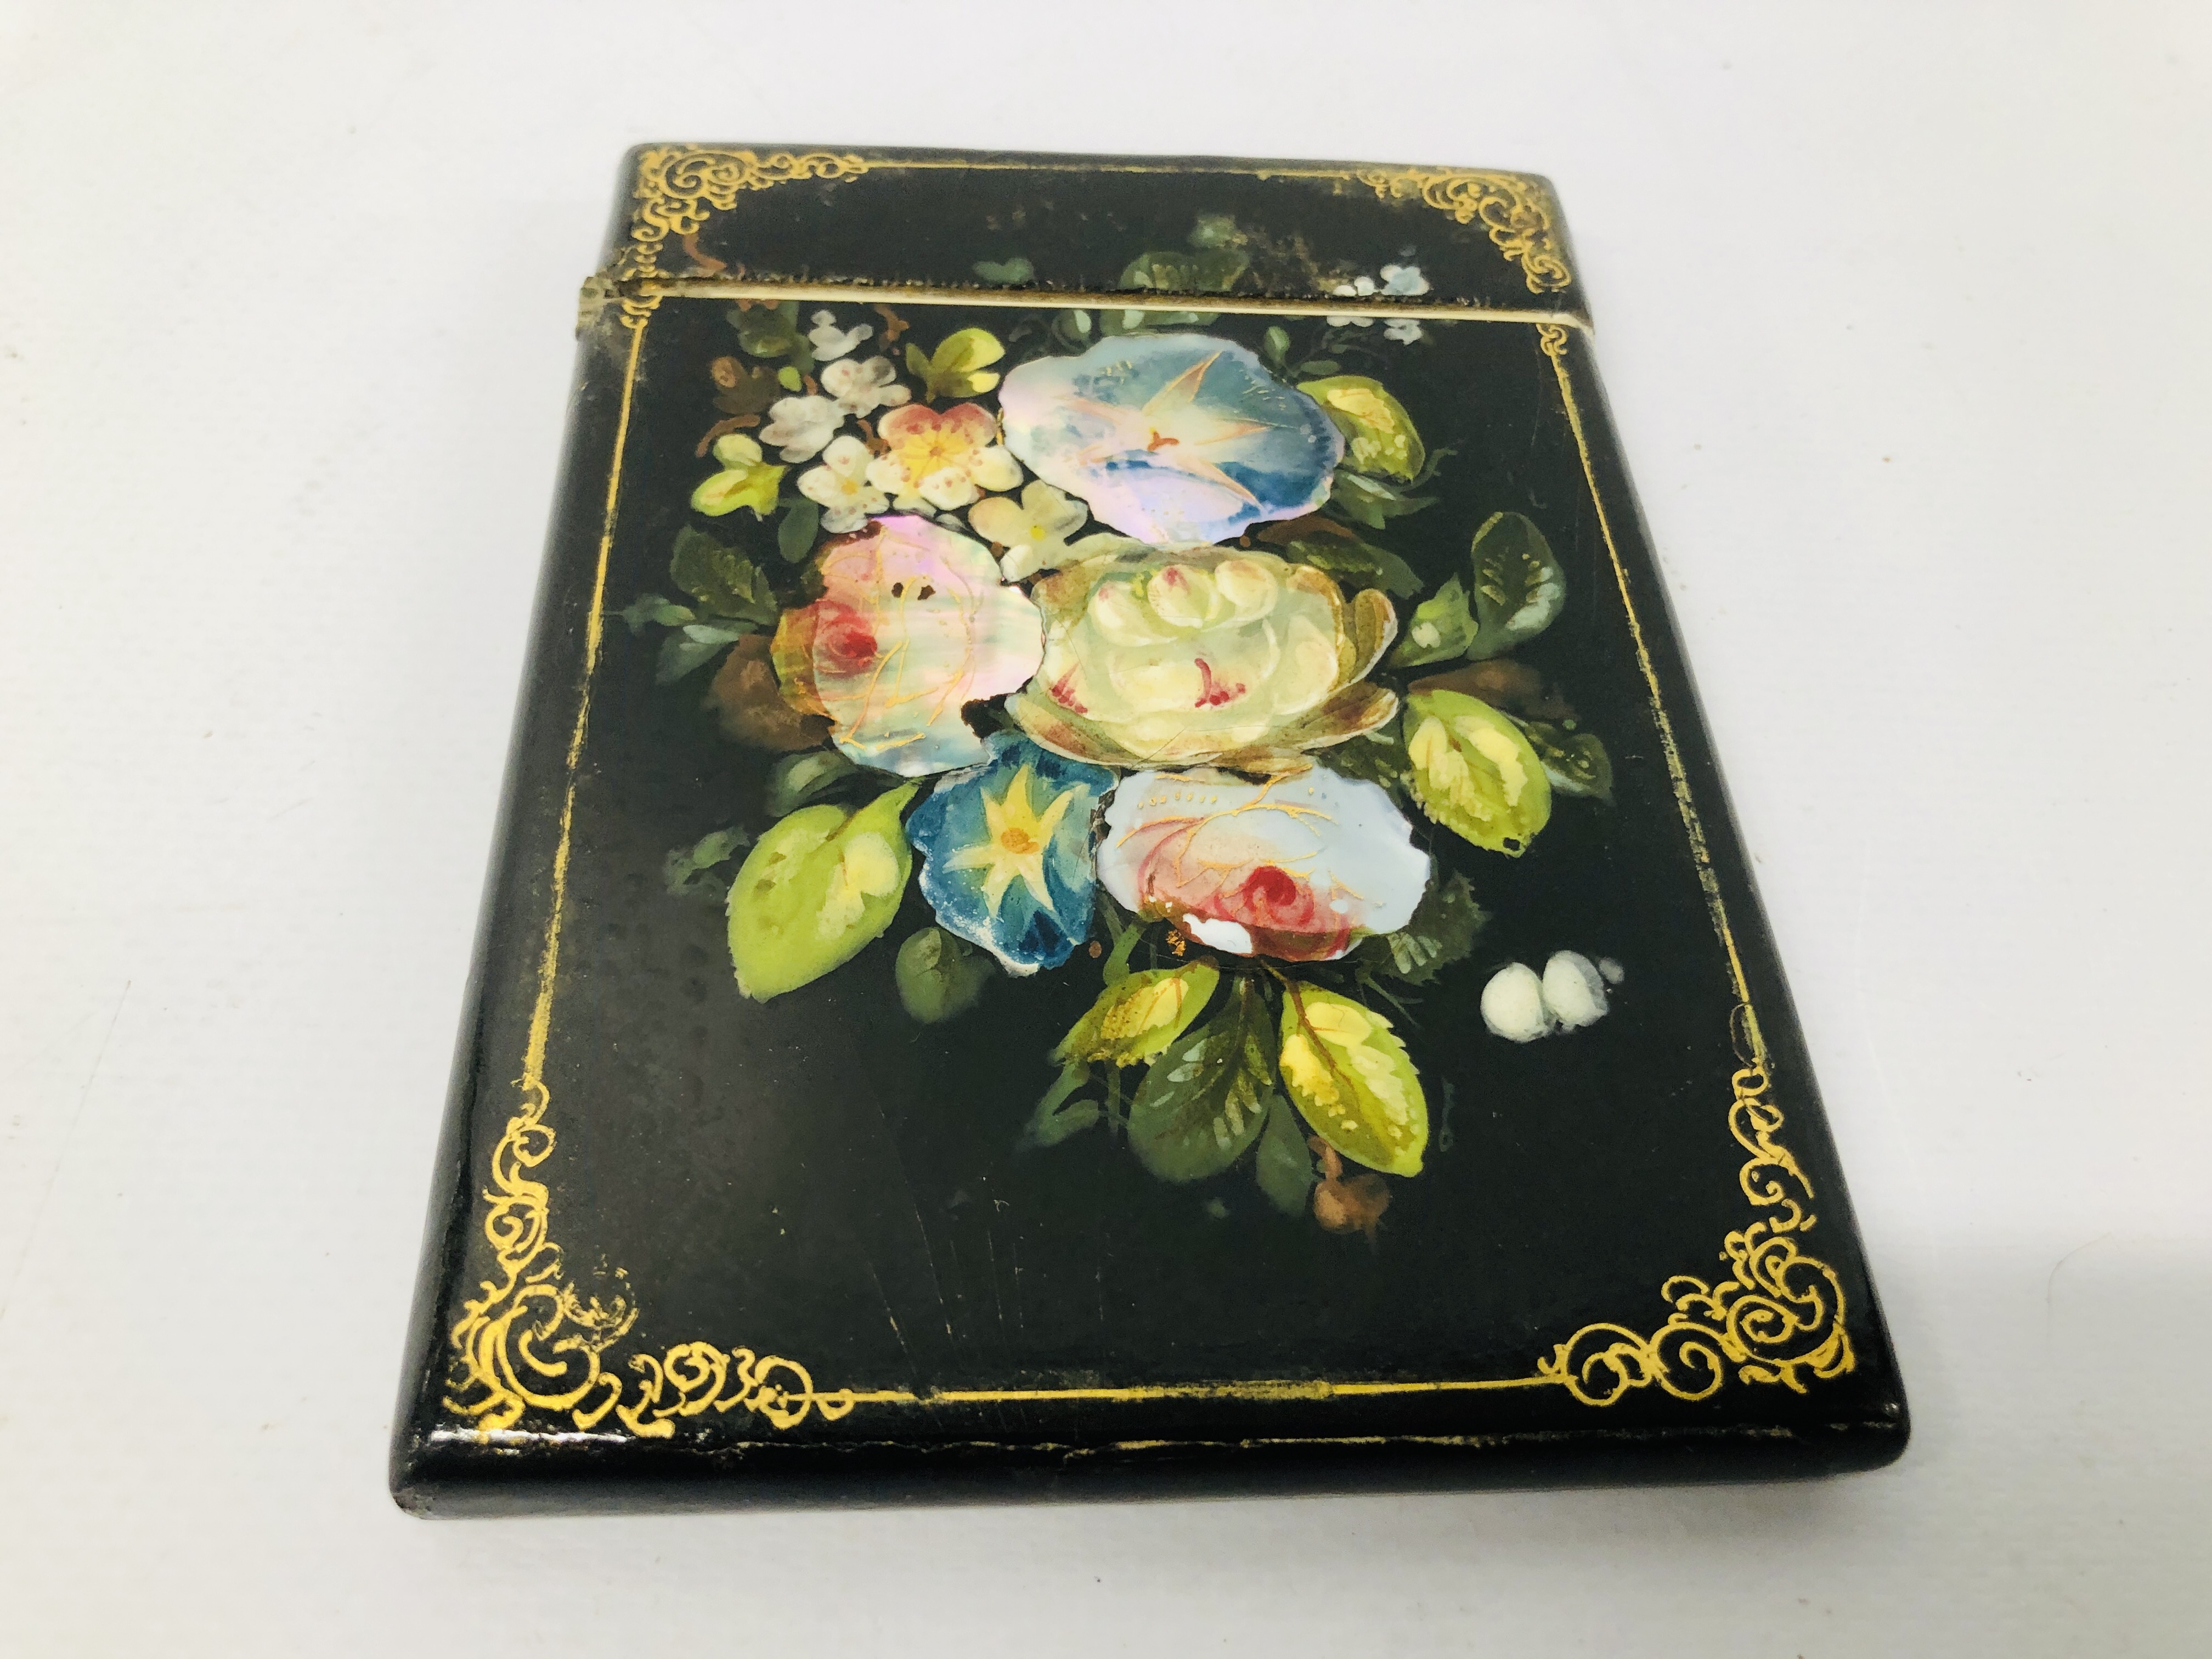 2 X VICTORIAN PAPIER MACHE CARD CASES BEAUTIFULLY DECORATED WITH HAND PAINTING MOTHER OF PEARL - Image 2 of 7